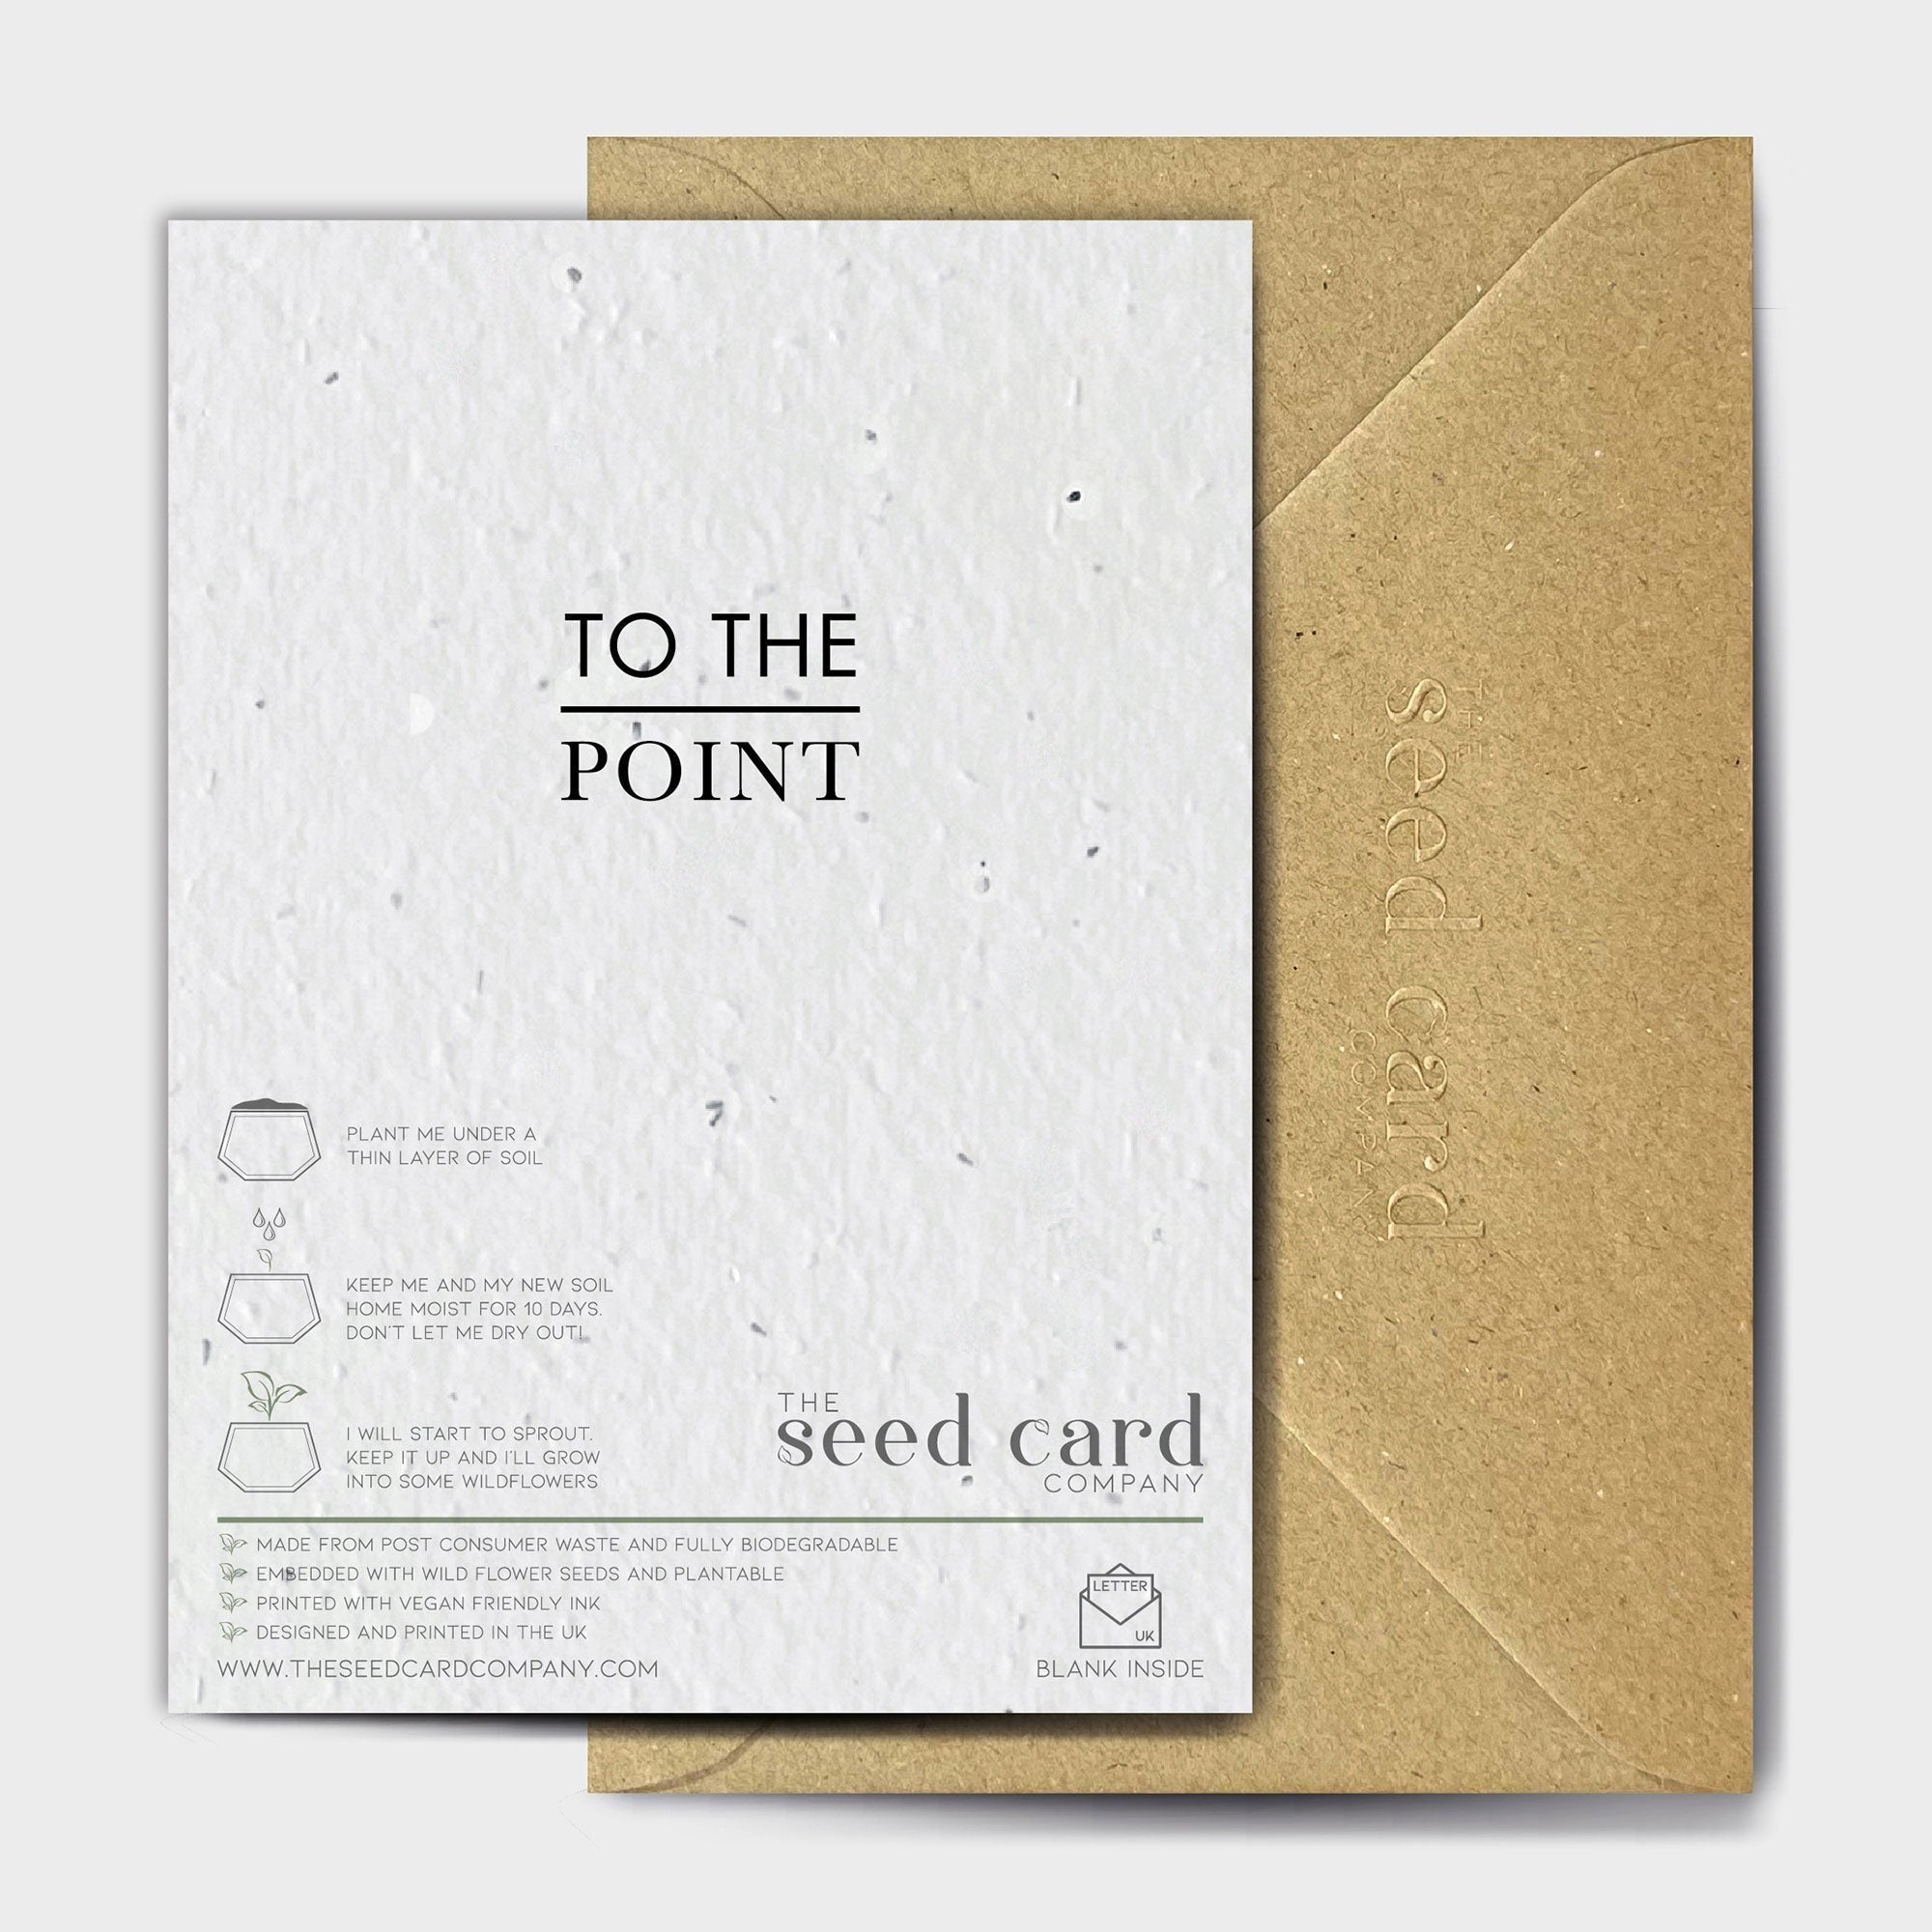 Shop online 26 Years - 100% biodegradable seed-embedded cards Shop -The Seed Card Company